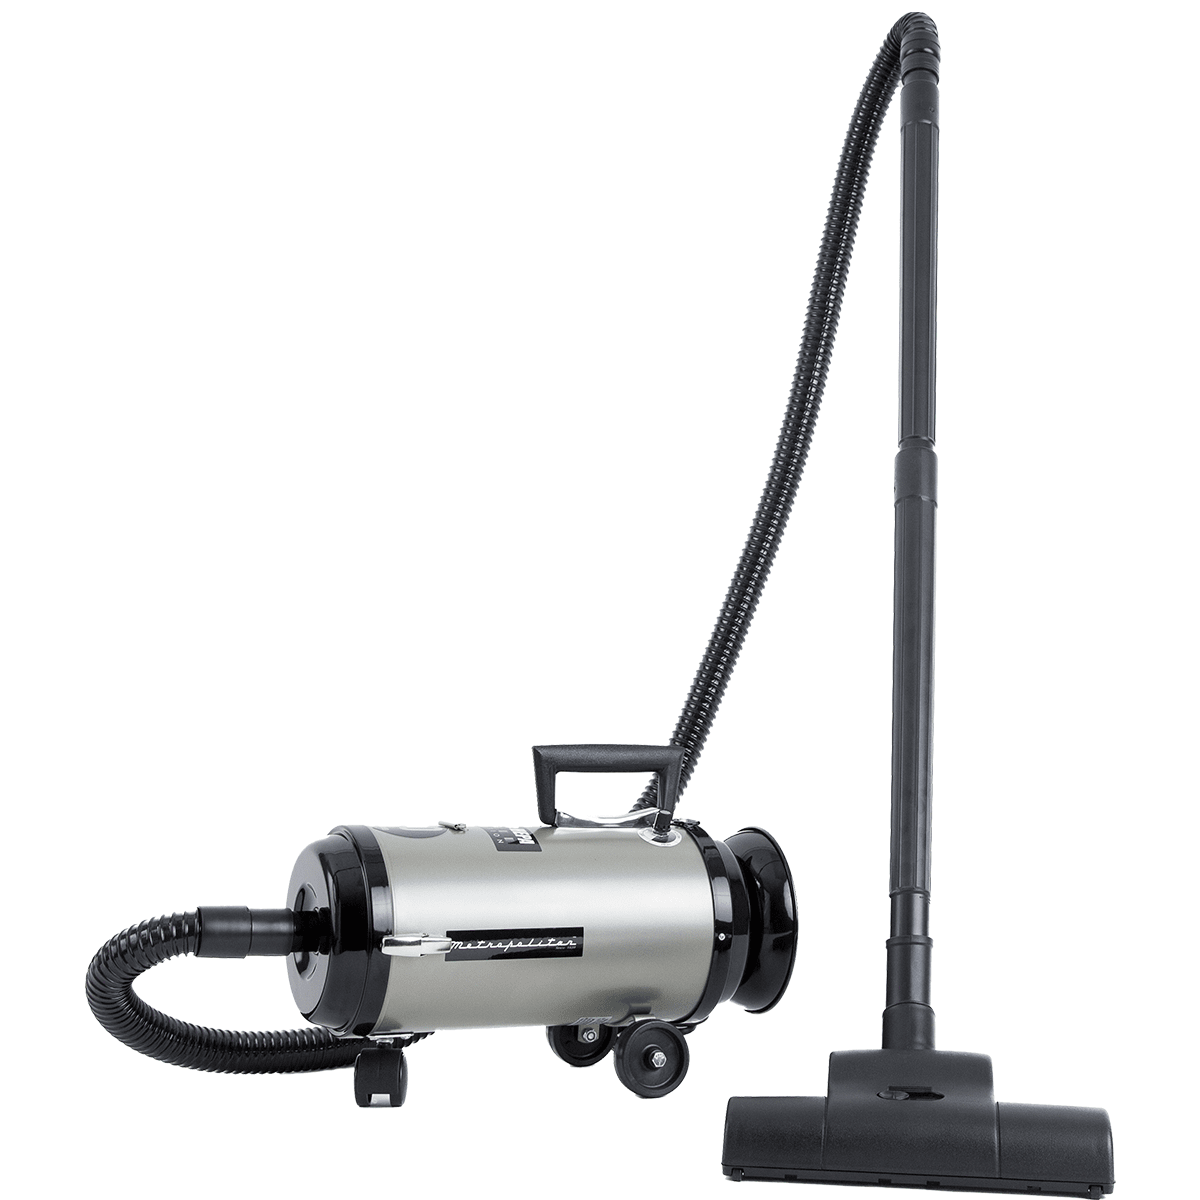 Metrovac Professional Evolution Variable Speed Compact Canister Vacuum